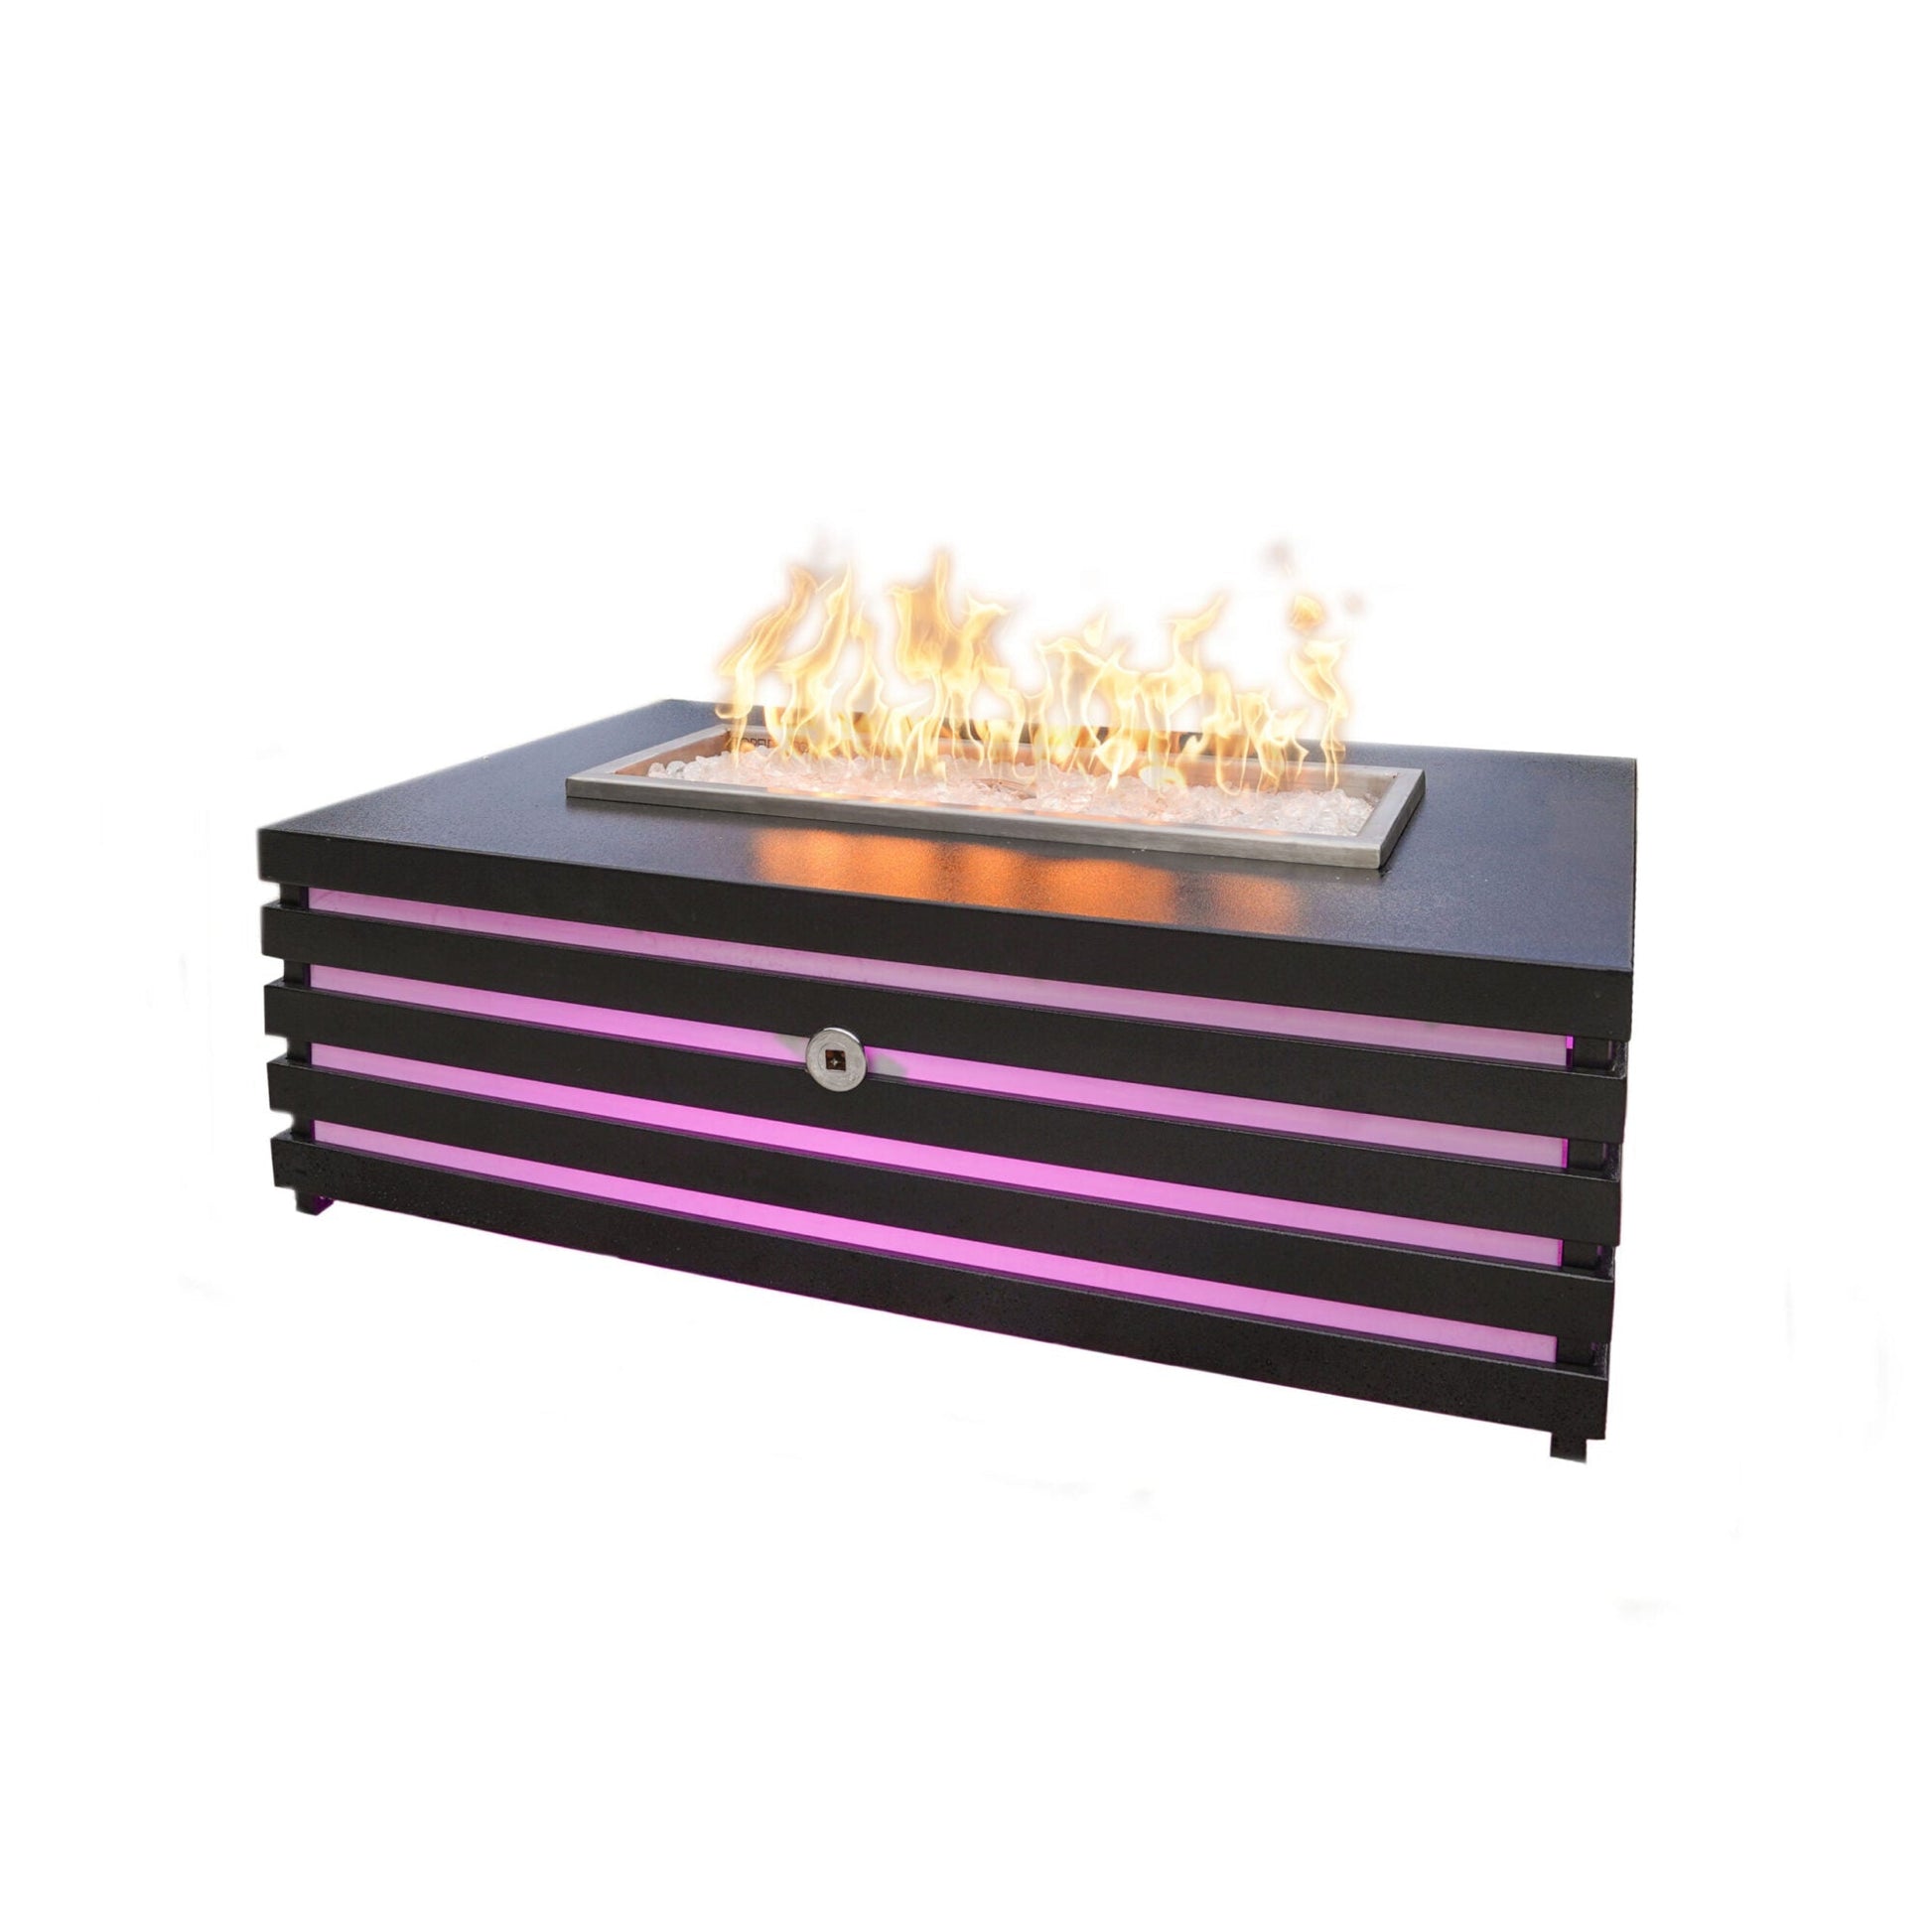 The Outdoor Plus Amina 60" Black Powder Coated Liquid Propane Fire Pit with Match Lit with Flame Sense Ignition